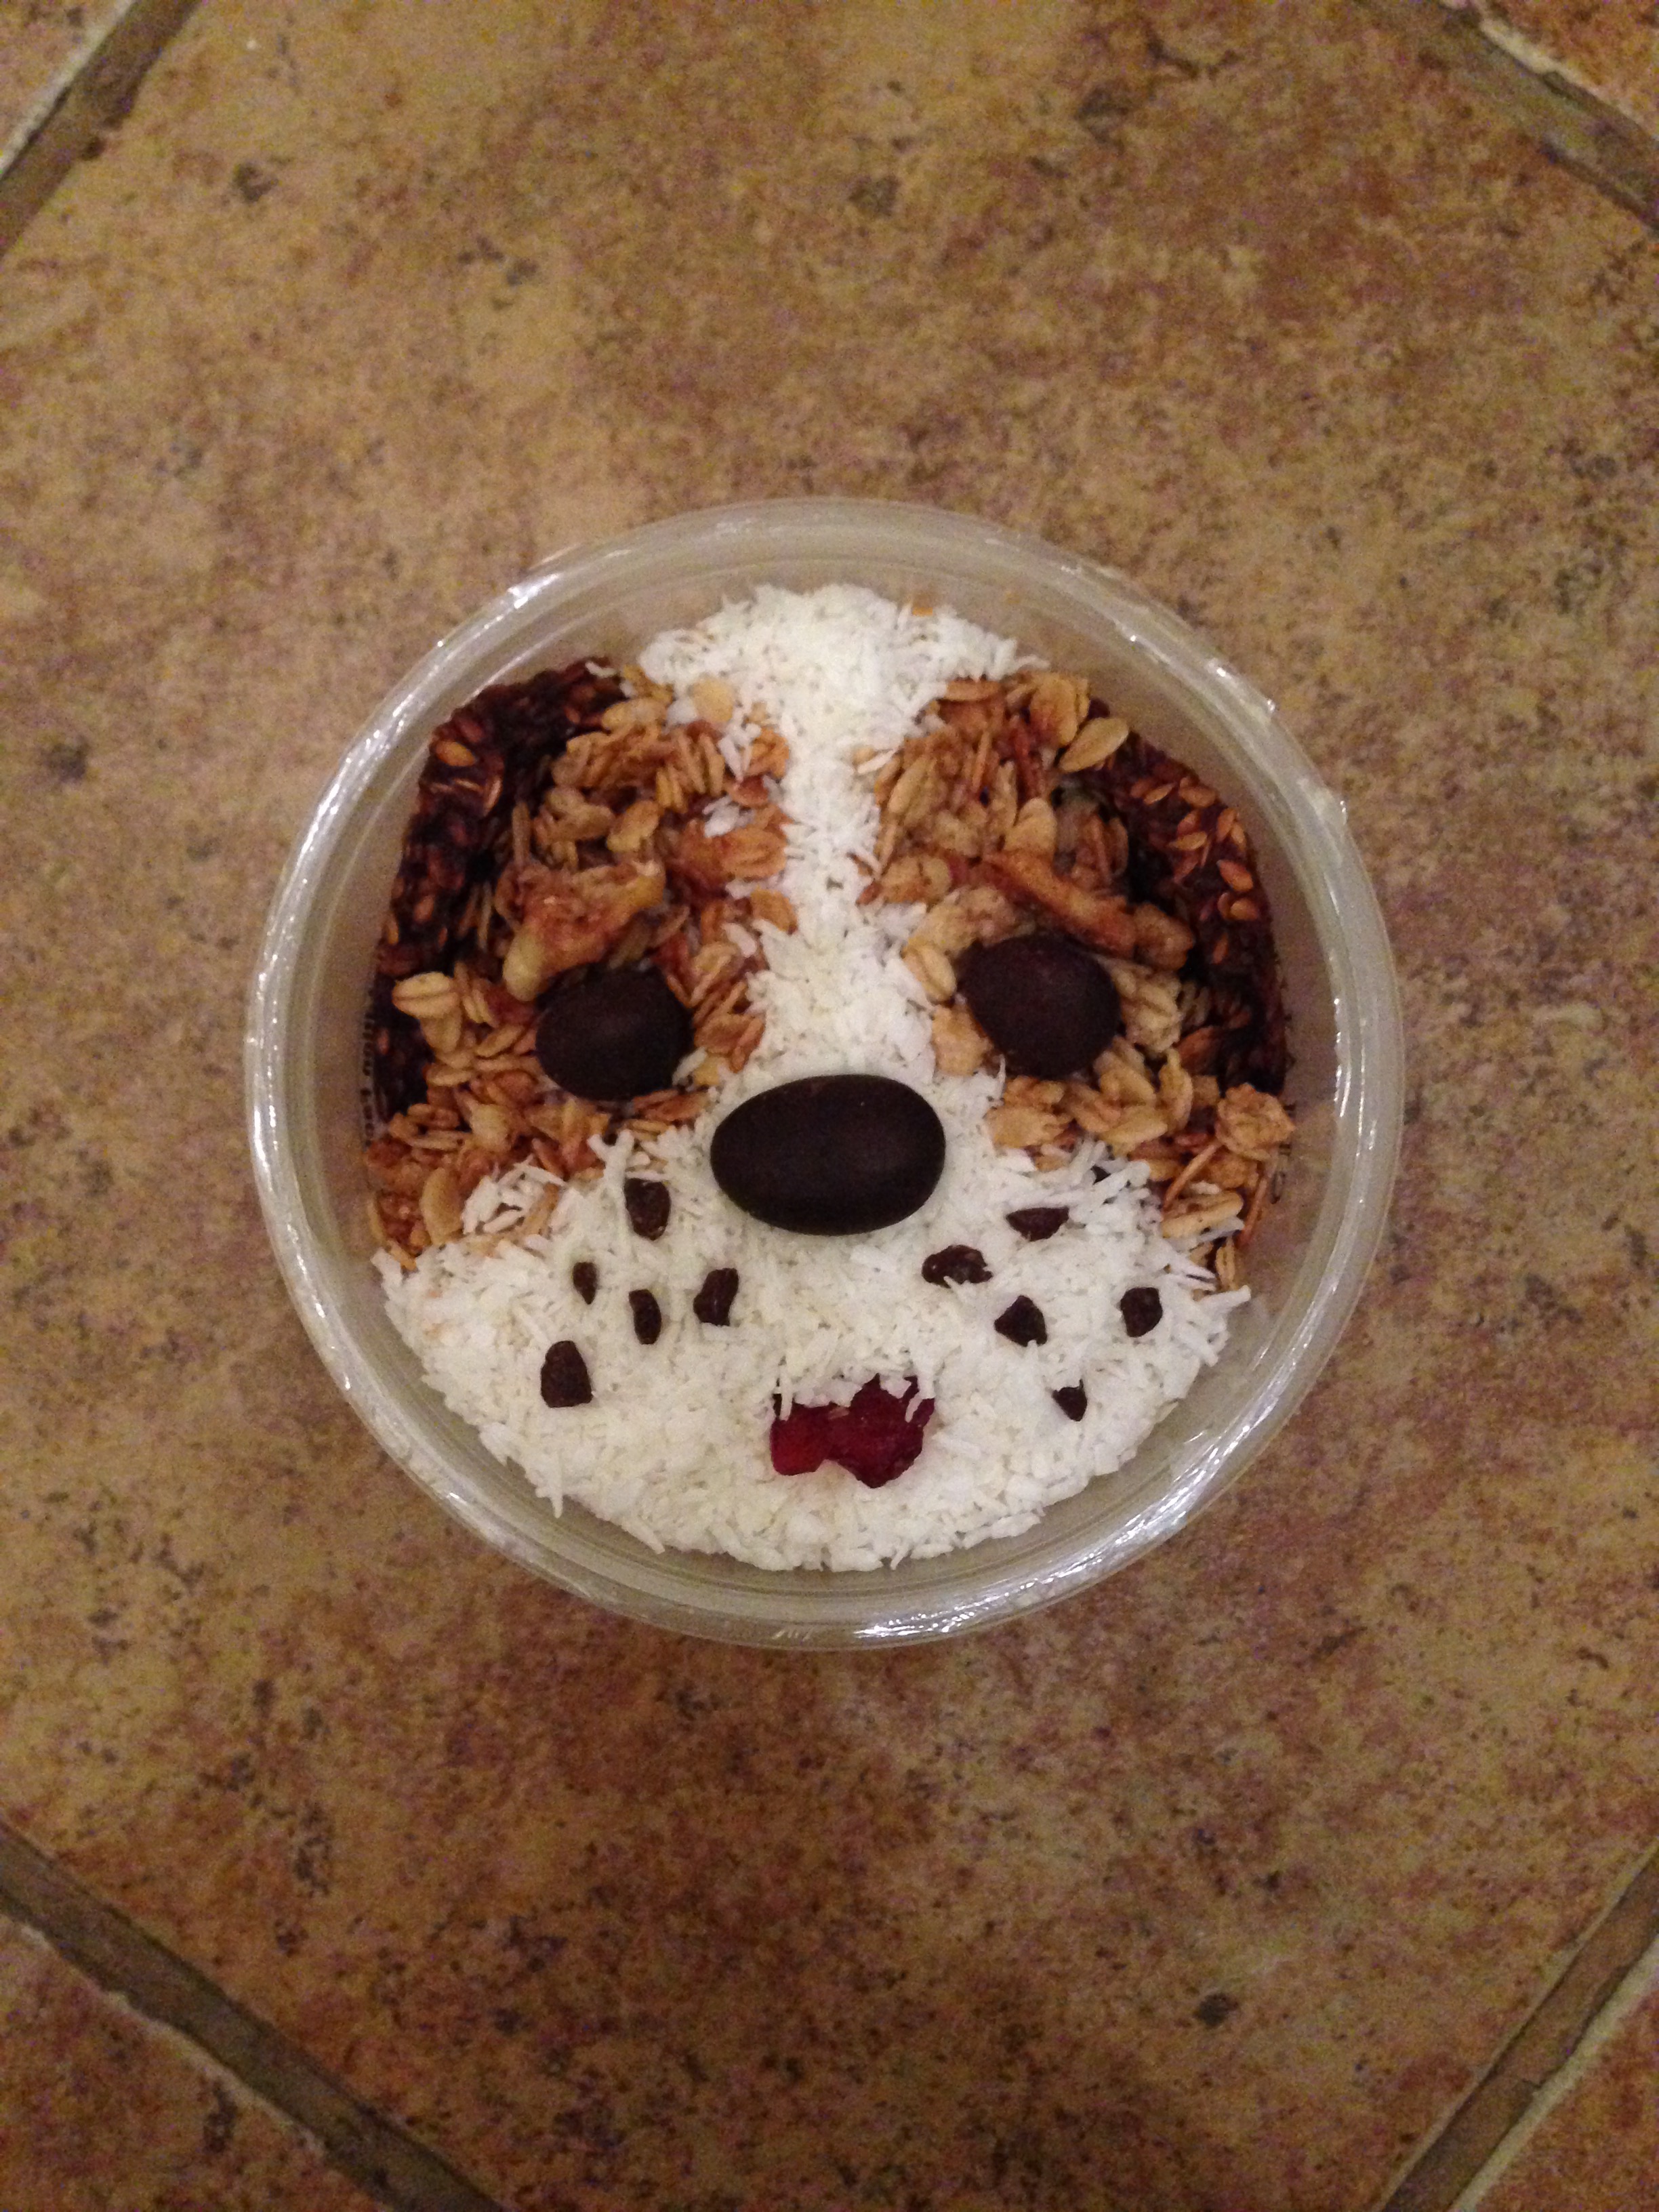 Food arranged to resemble the shape of a dog's face